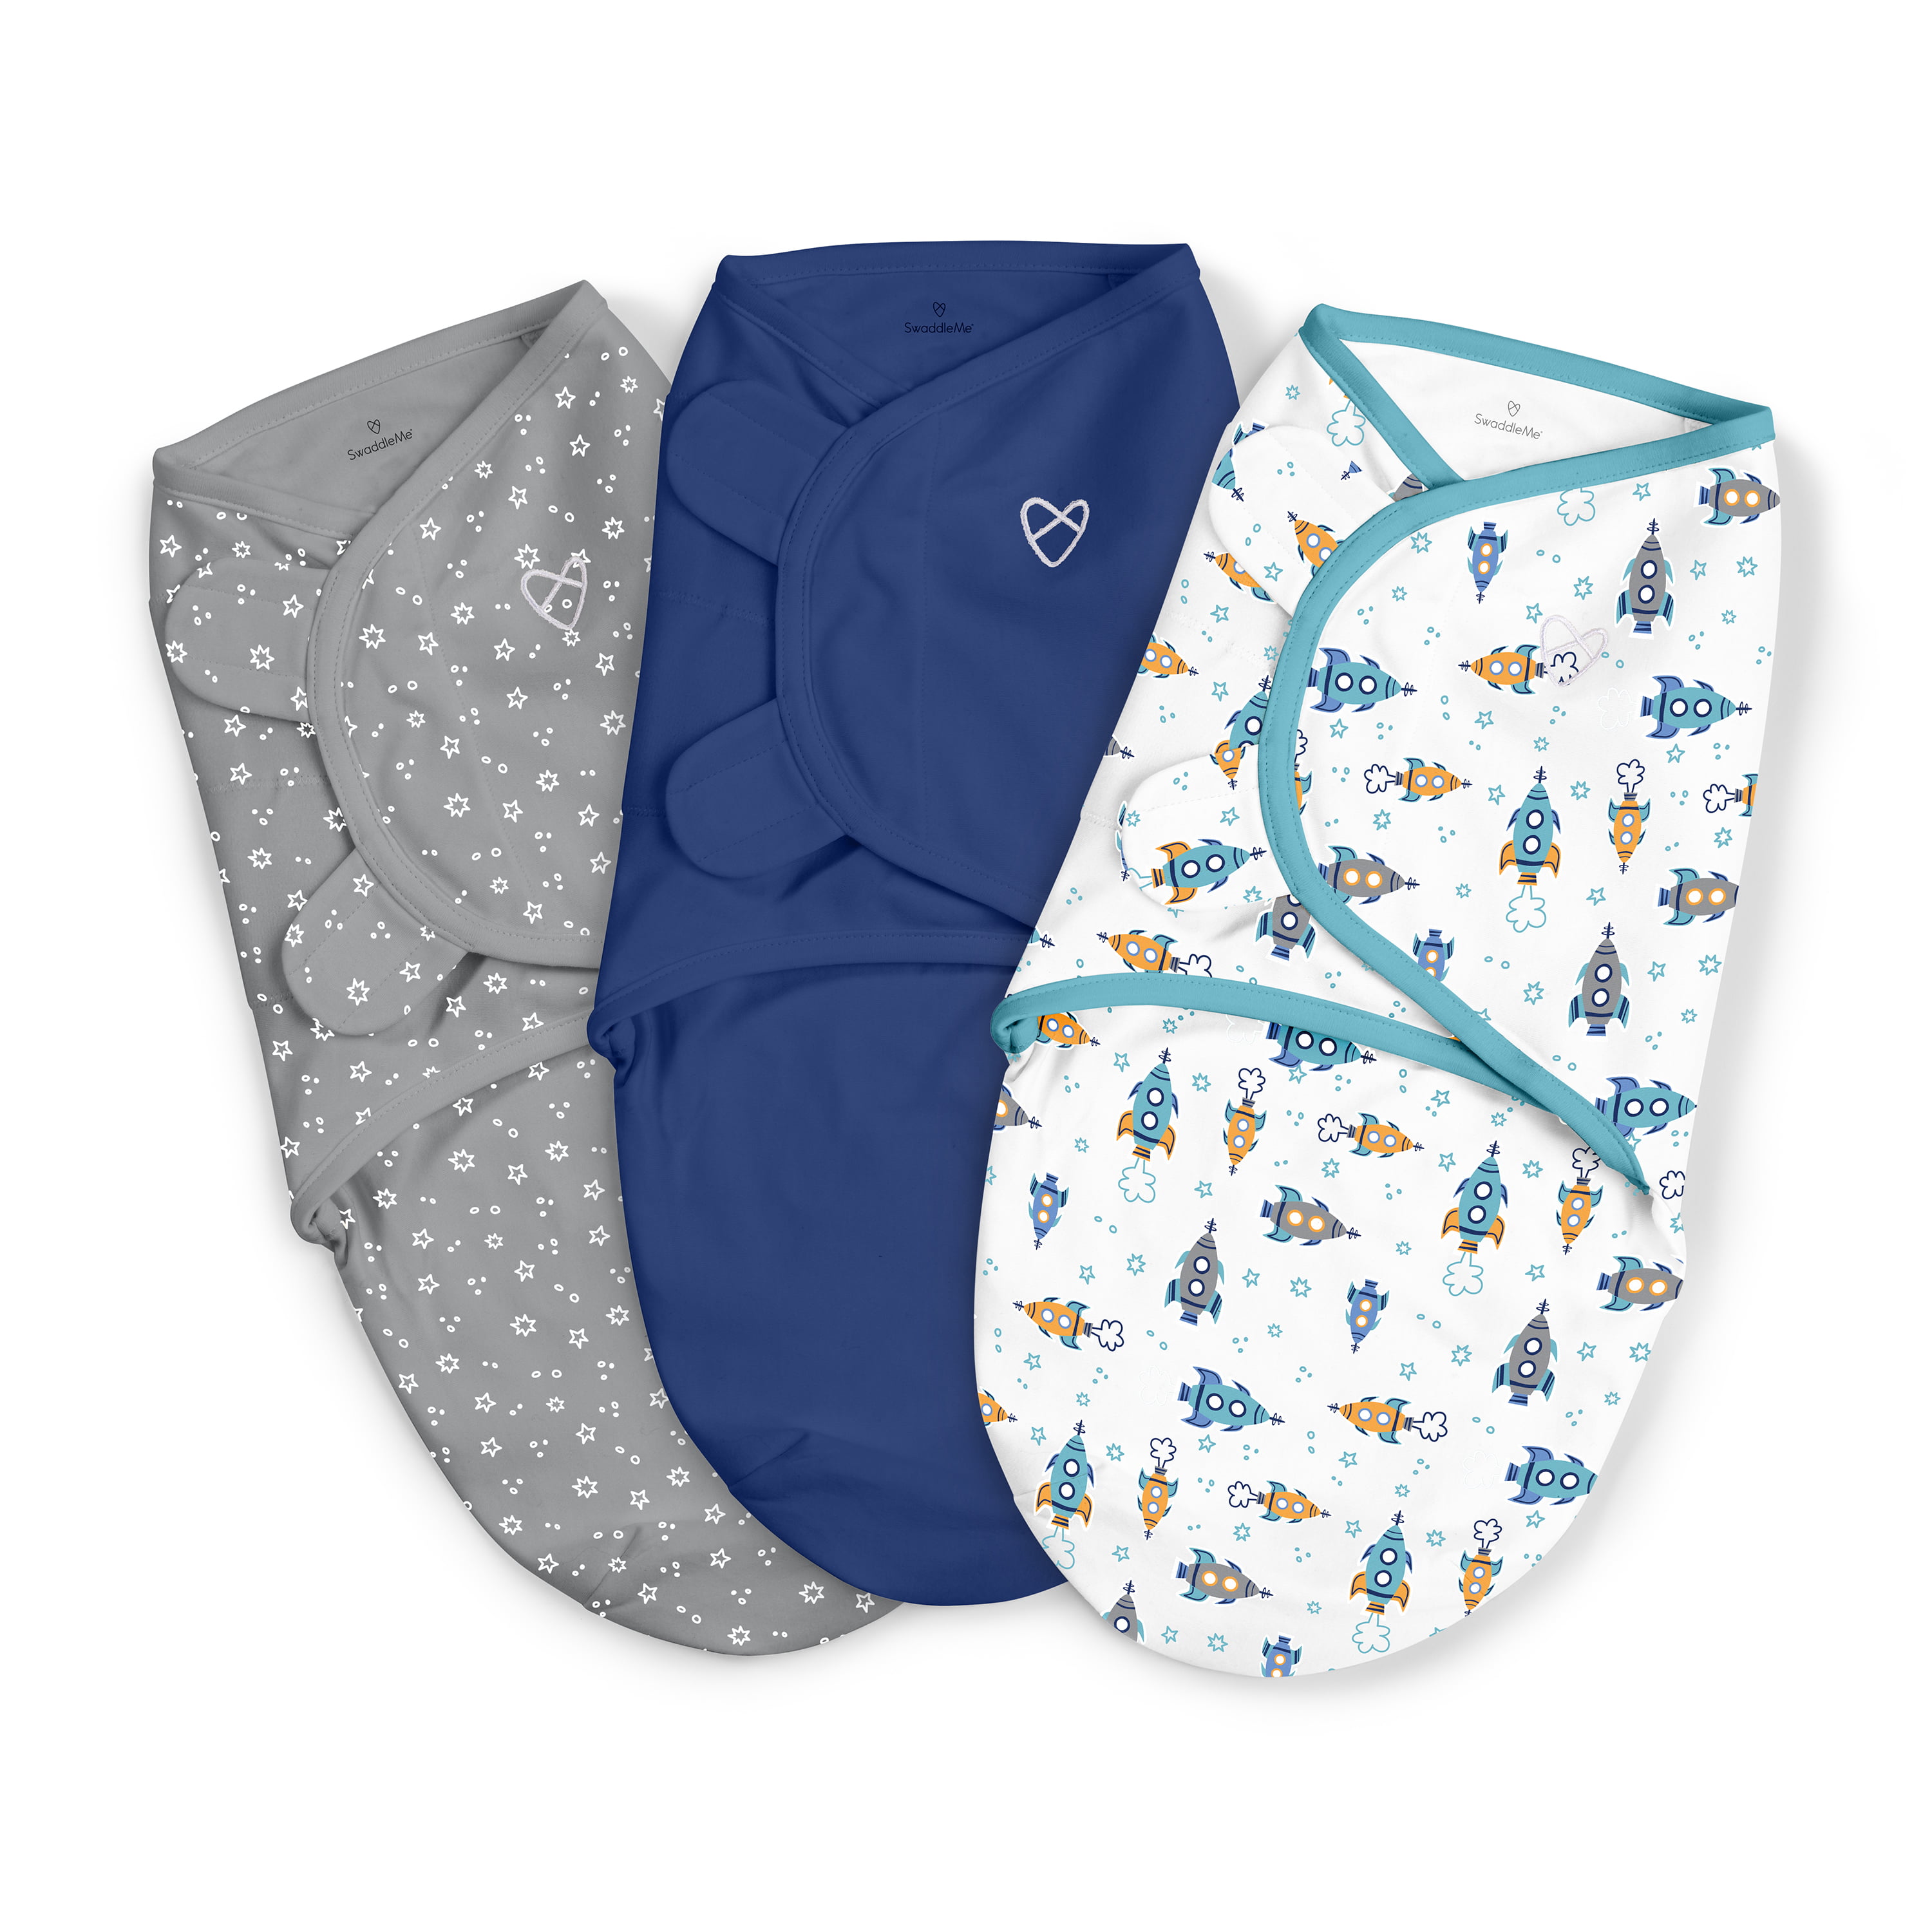 SwaddleMe Original Swaddle 3-6 Months Feather Stripe 2-Pack Size Large